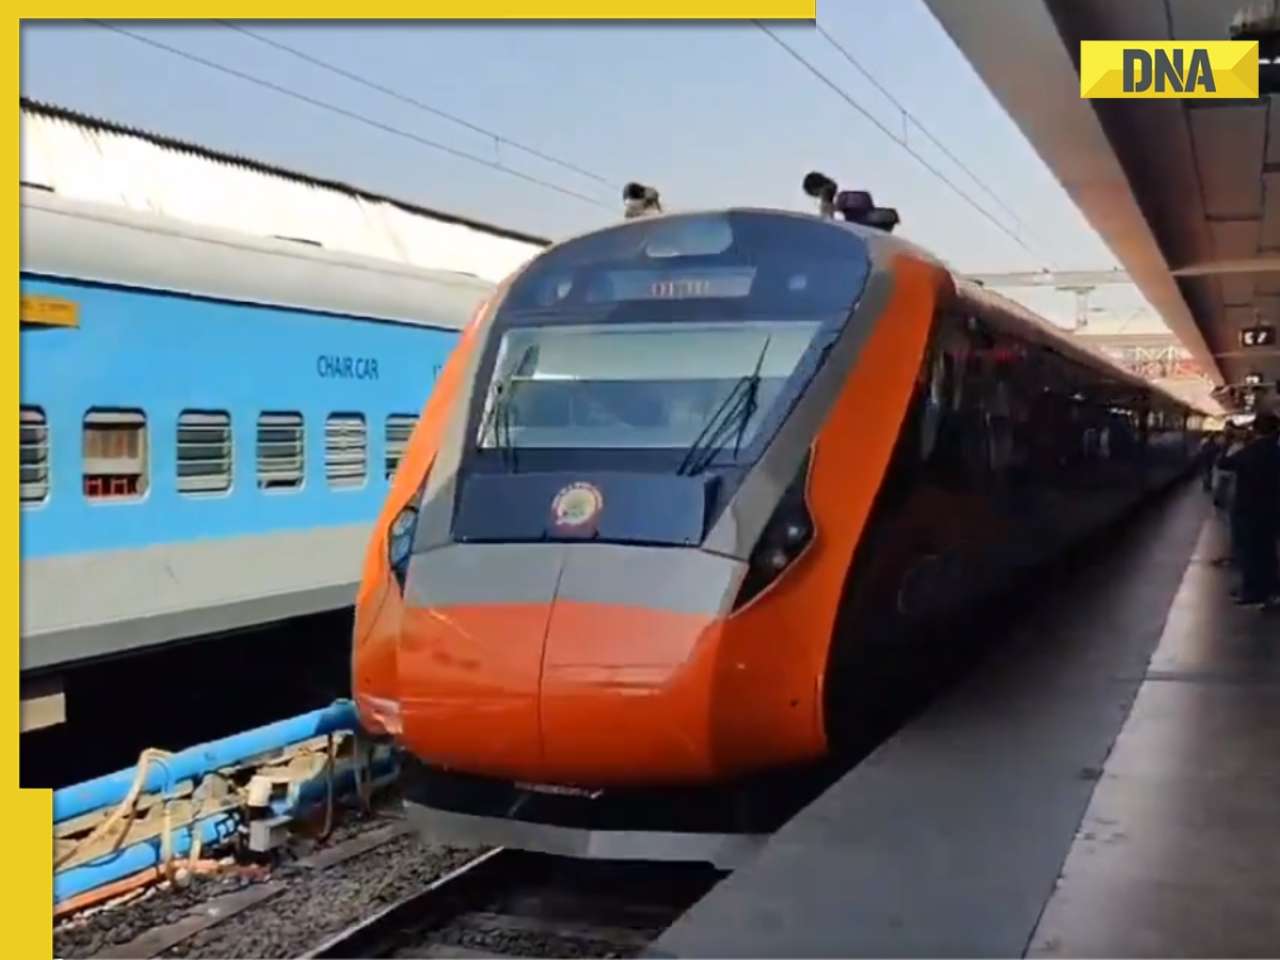 Mumbai-Ahmedabad new Vande Bharat Express launched: Check timings, top speed, stations and more